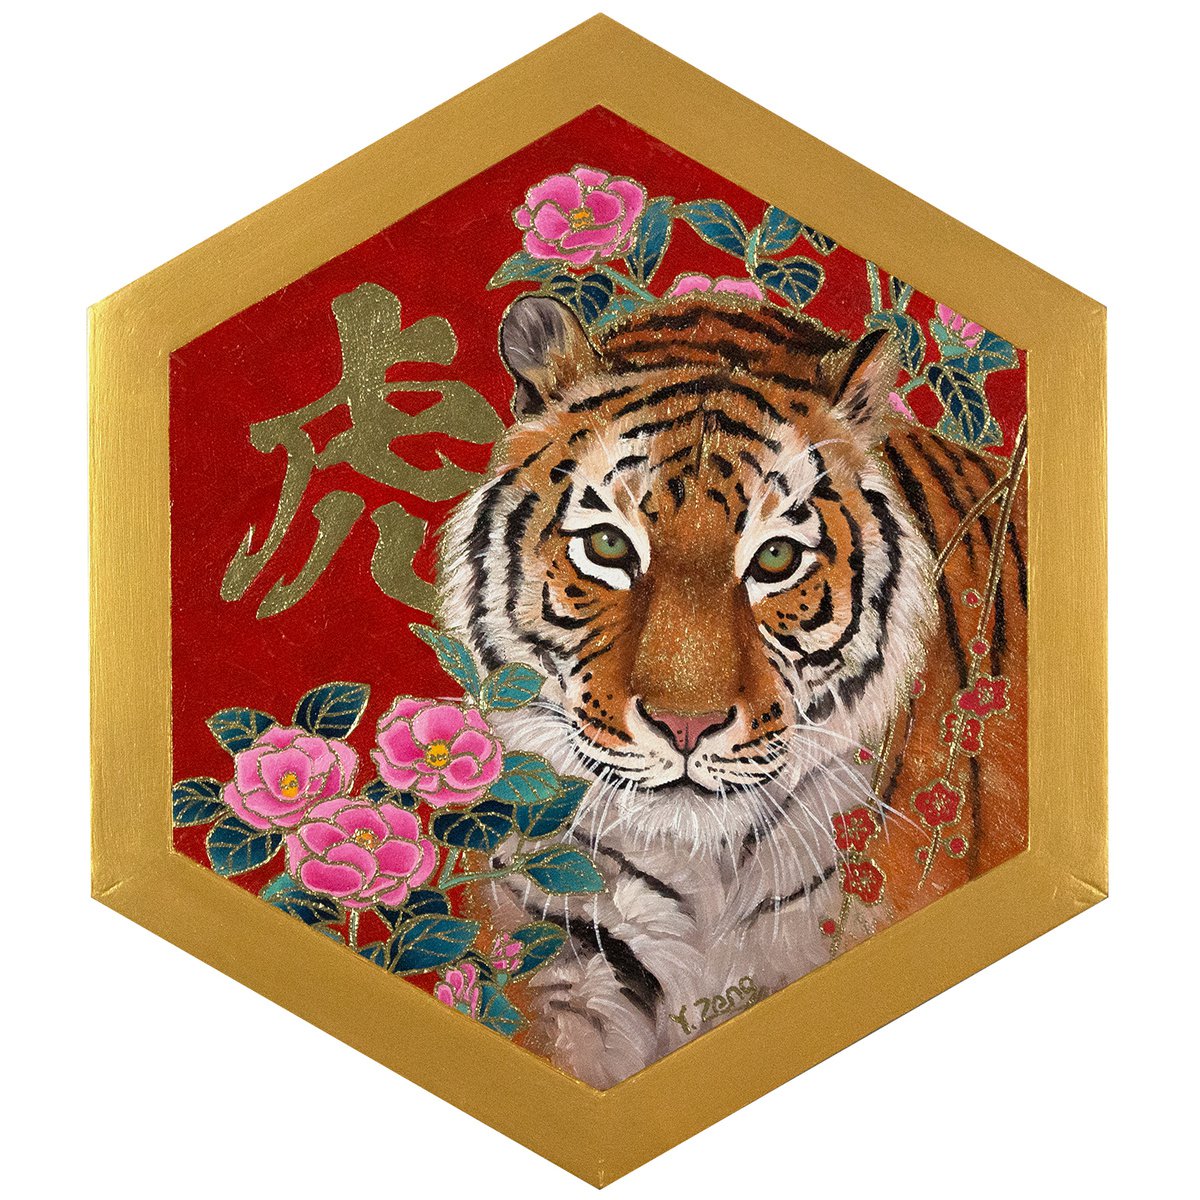 Yuzen style Year of tiger 2022 by Yue Zeng